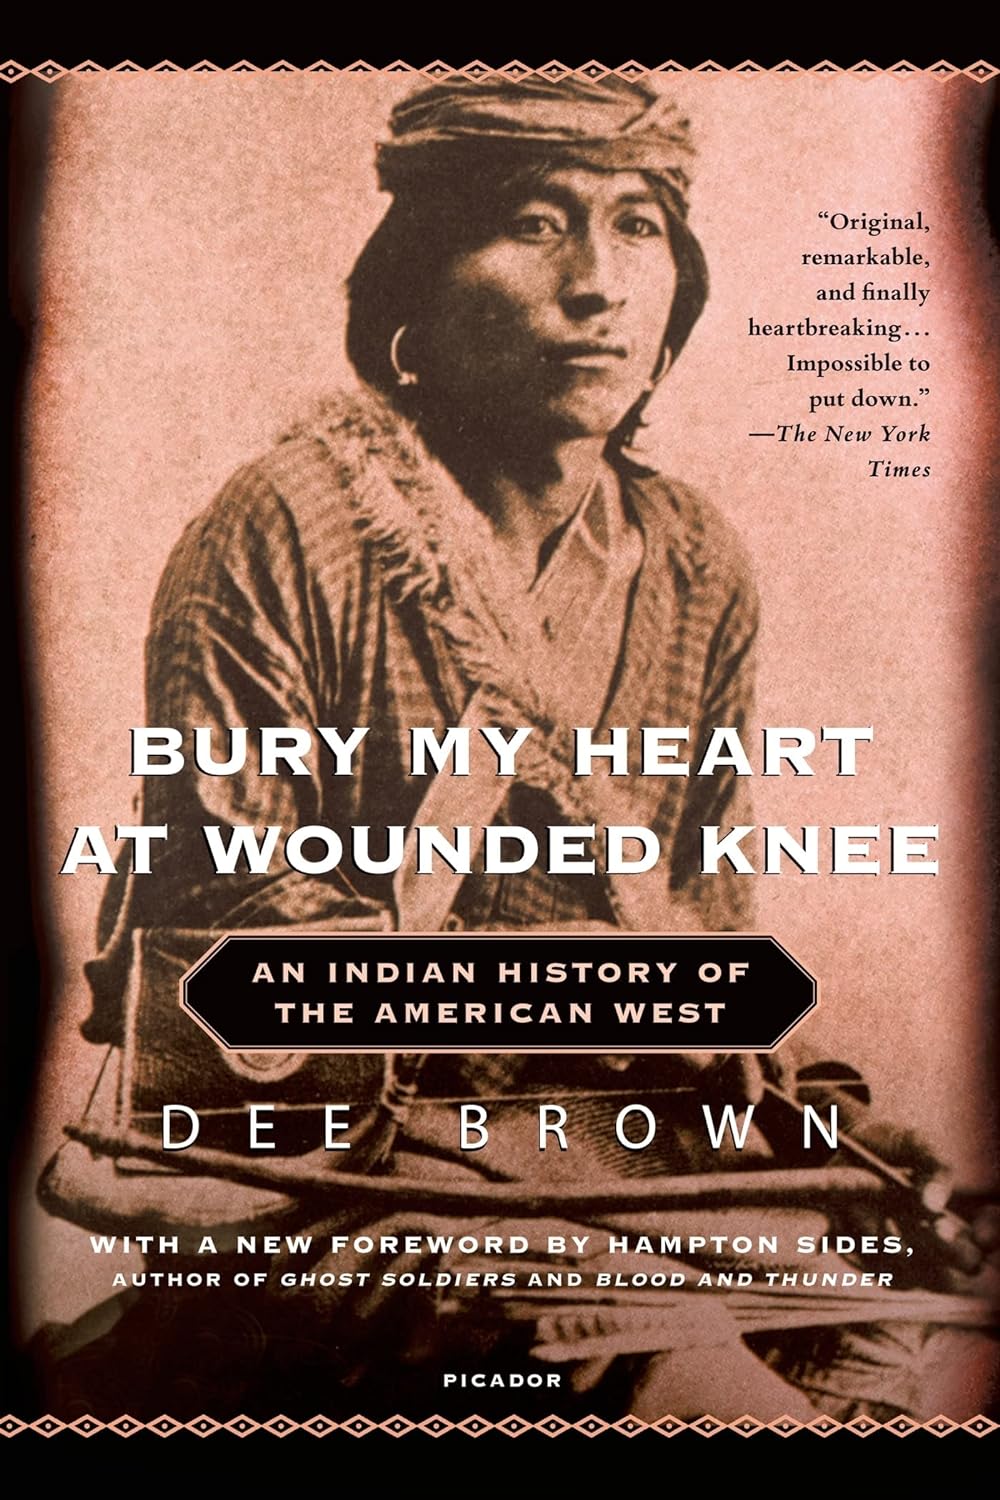 Bury My Heart at Wounded Knee An Indian History of the American West by Dee Brown (1970)